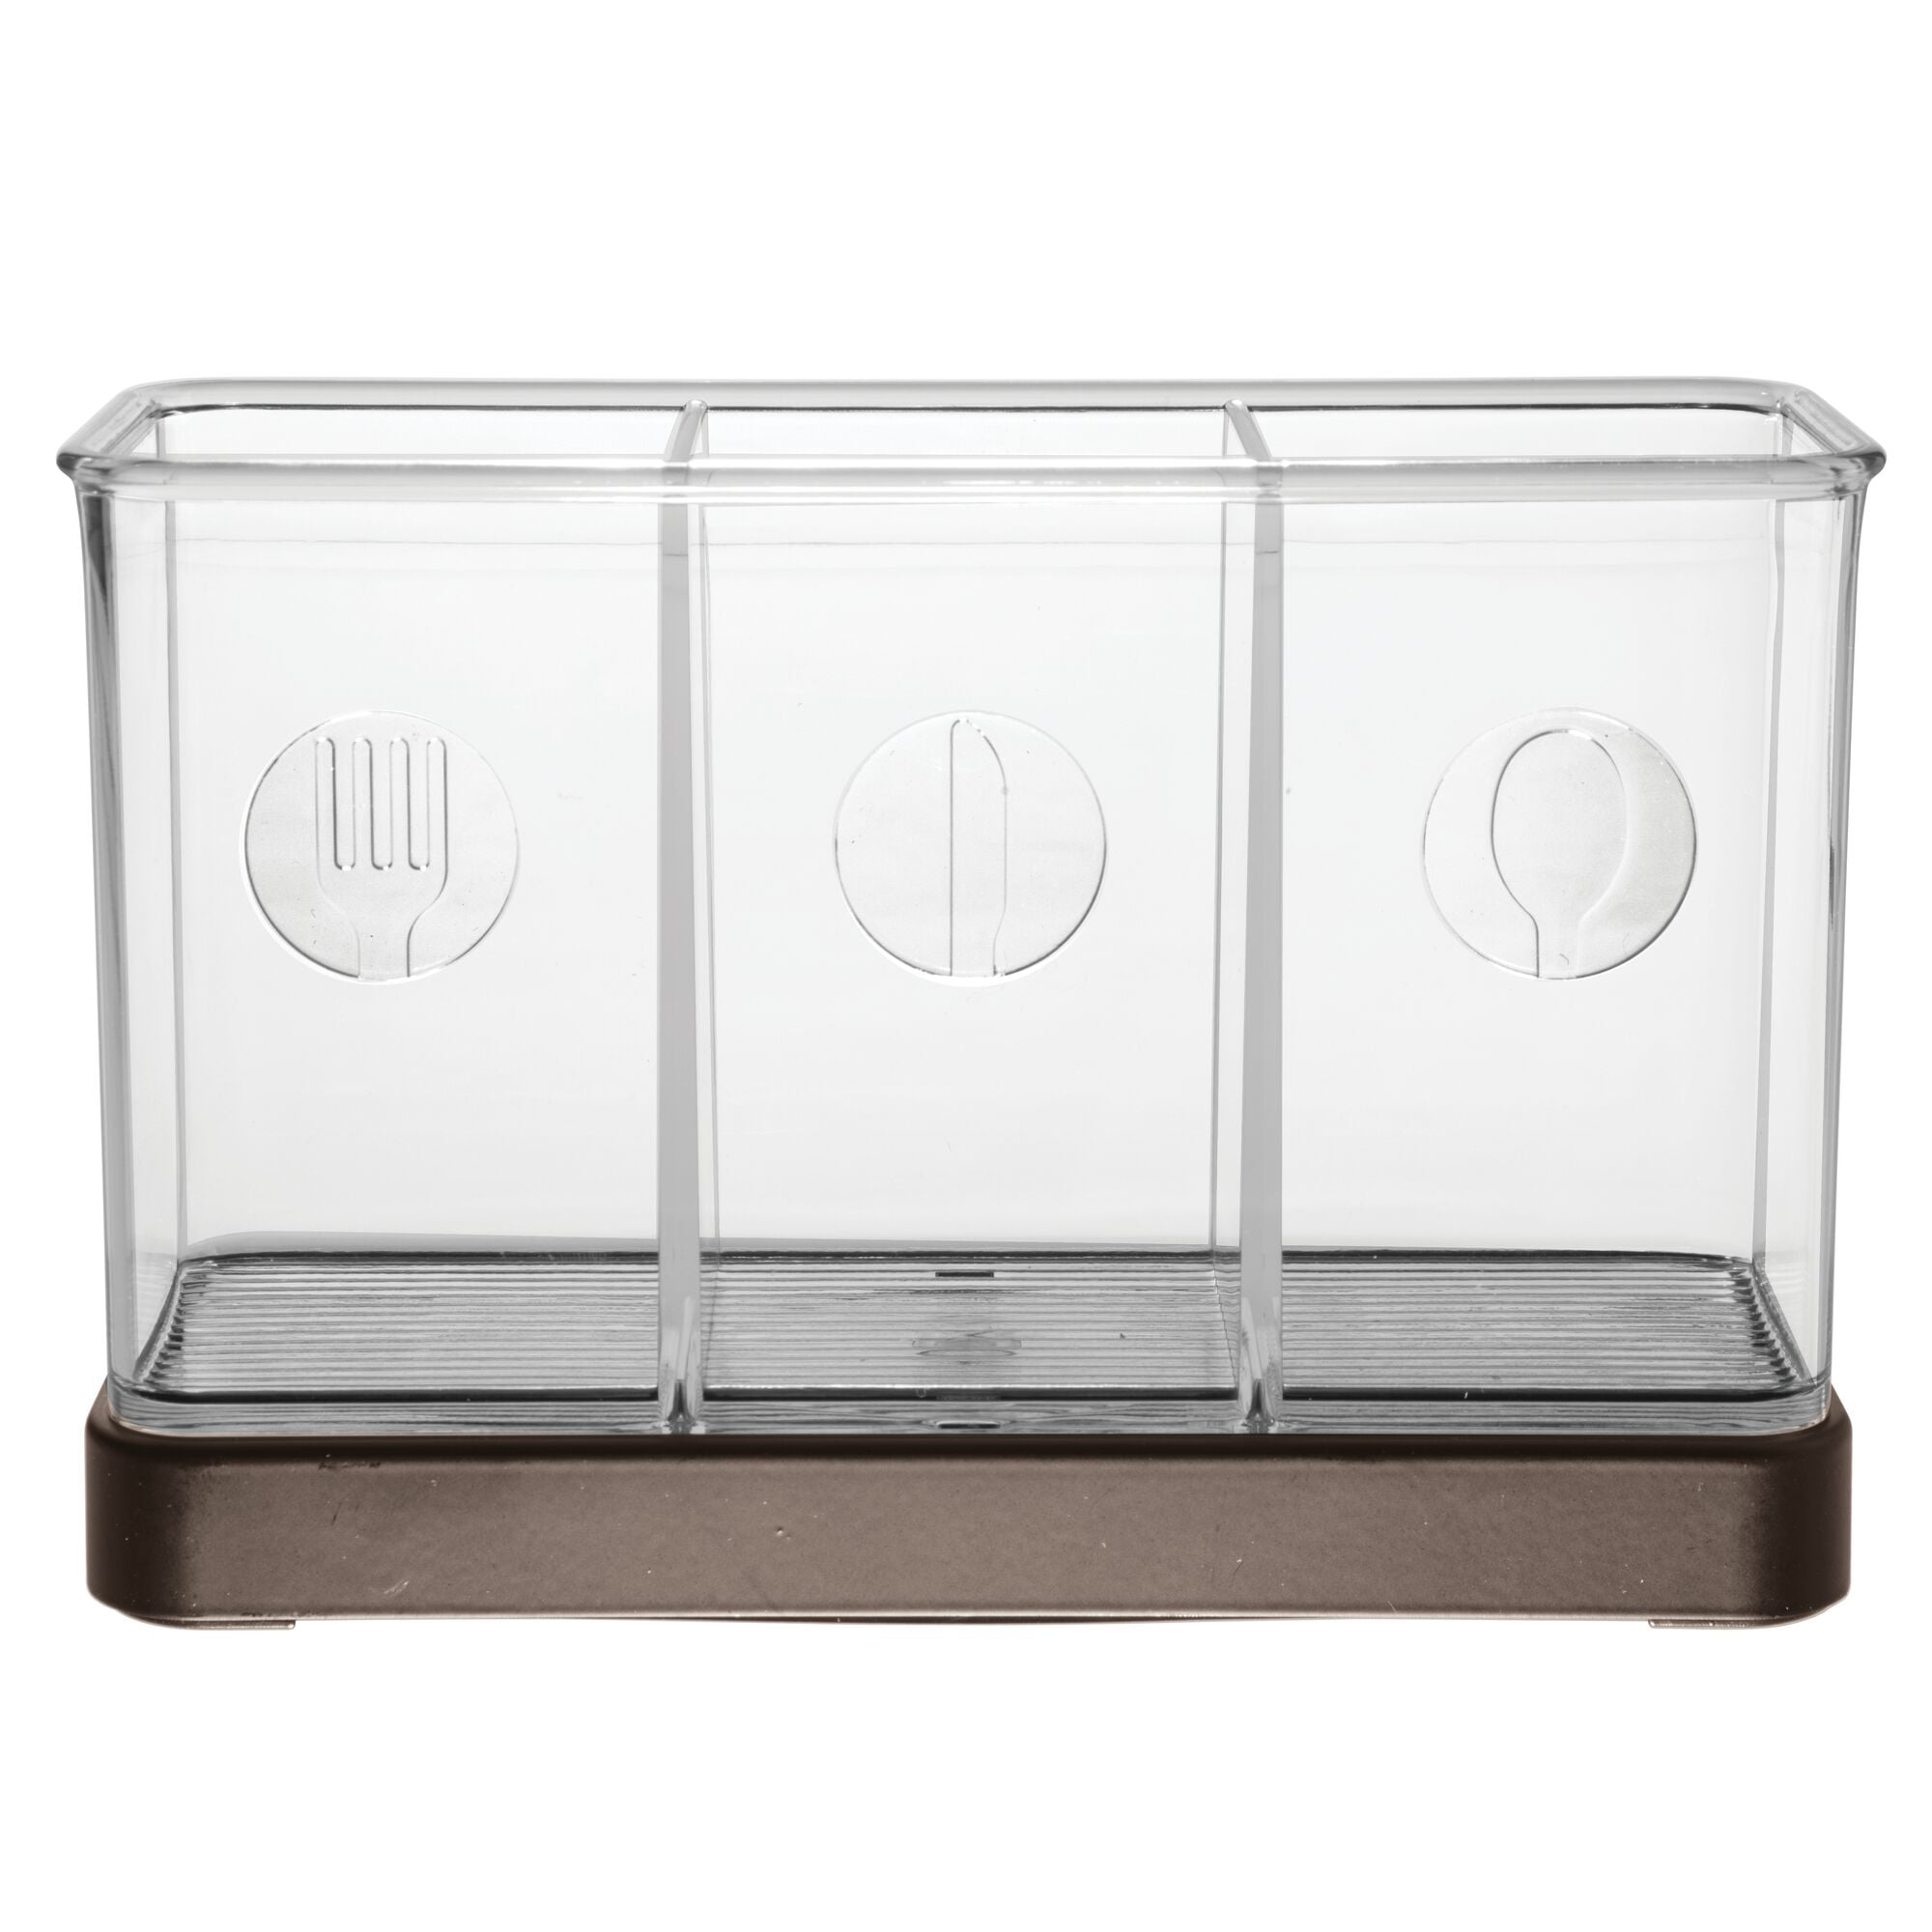  mDesign Plastic Cutlery Storage Organizer Caddy Bin Tote with  Handle - Kitchen Cabinet Divided Pantry Basket for Forks, Knives, Spoons,  Napkins, Indoor/Outdoor Use, Lumiere Collection, 2 Pack - Clear: Home 